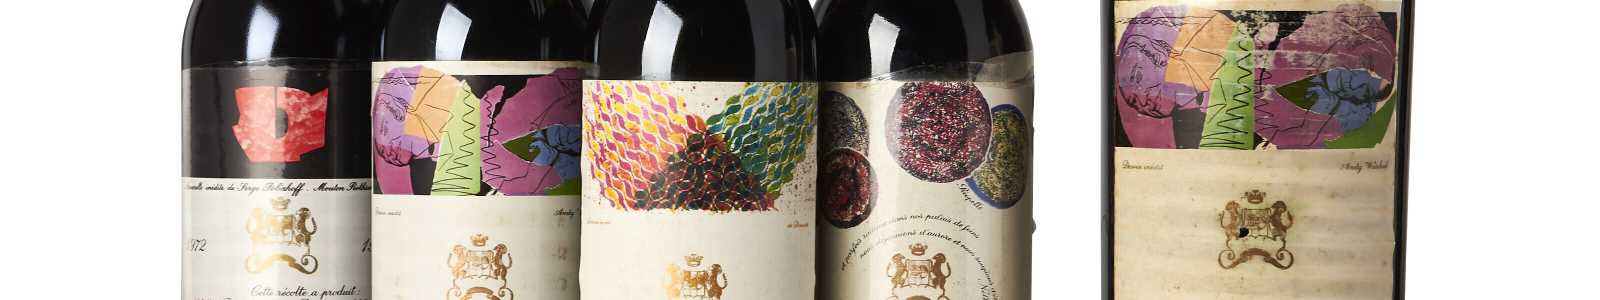 Fine and Rare Wines Online: Hong Kong Edition